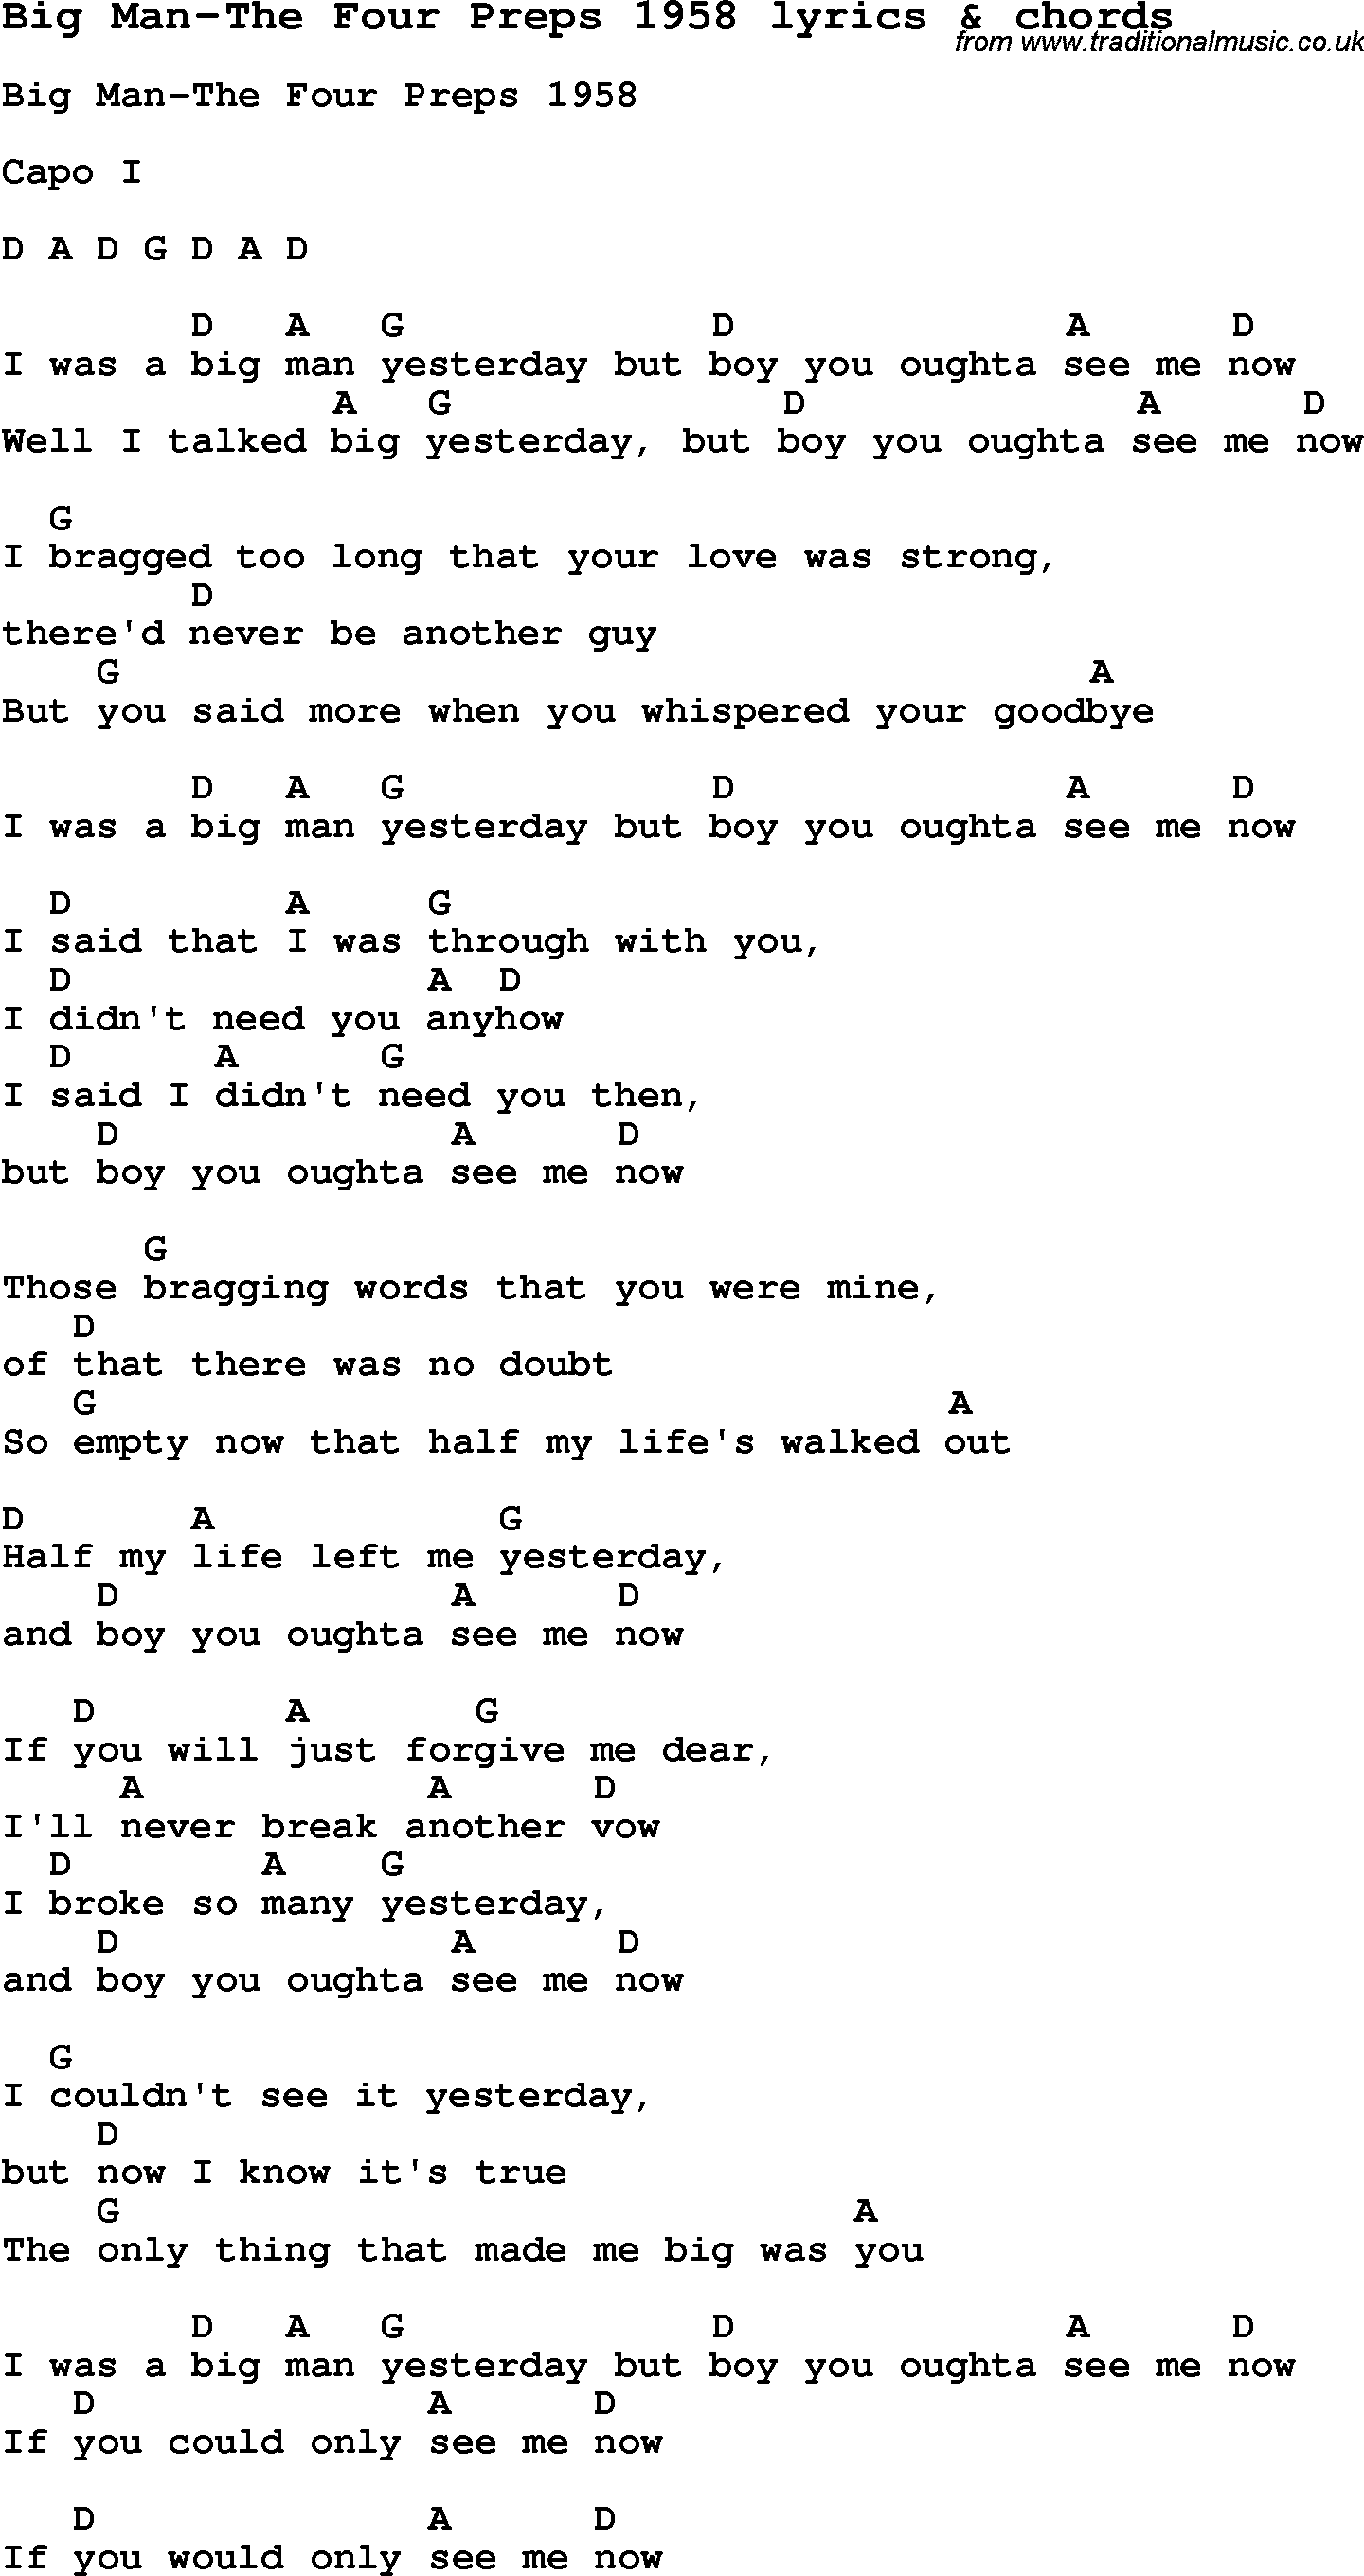 Love Song Lyrics For Big Man The Four Preps 1958 With Chords